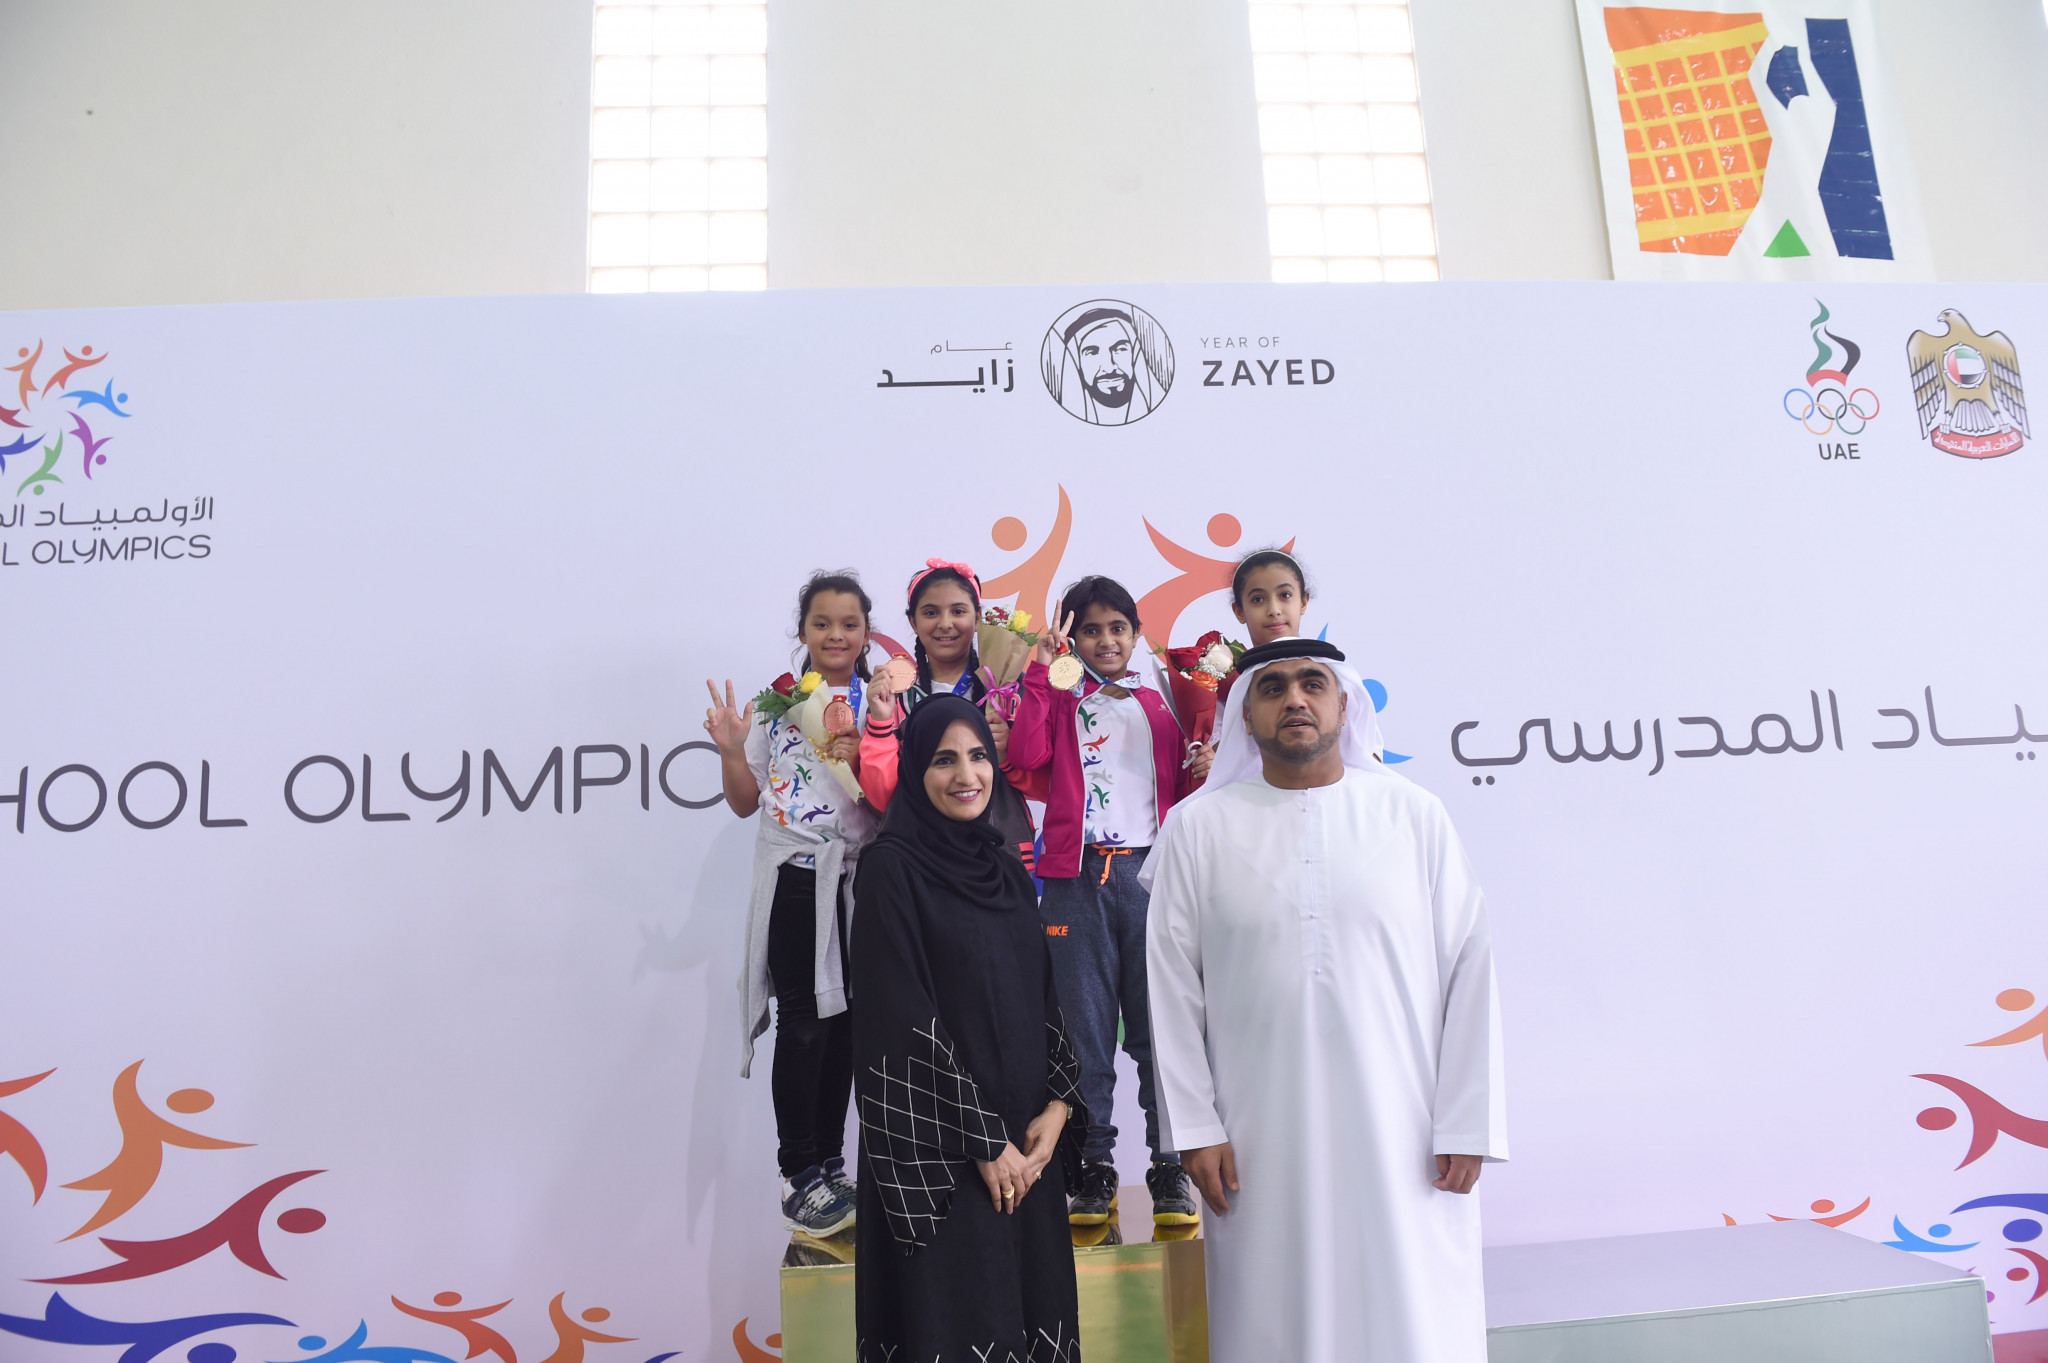 A new Presidential ruling has given girls in the UAE an opportunity to compete in sport ©UAE NOC